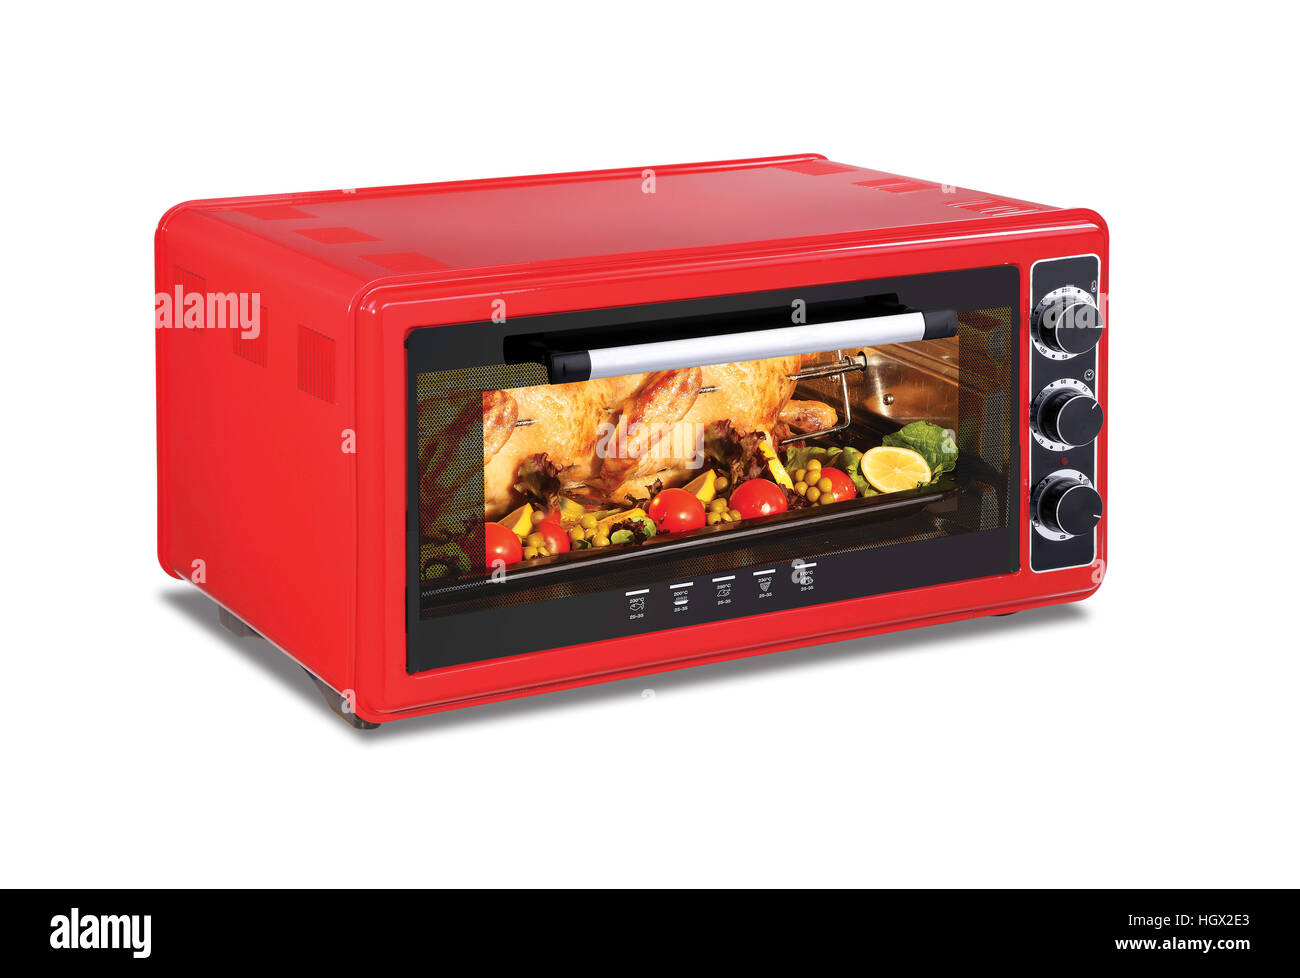 red microwave oven on a white background Stock Photo